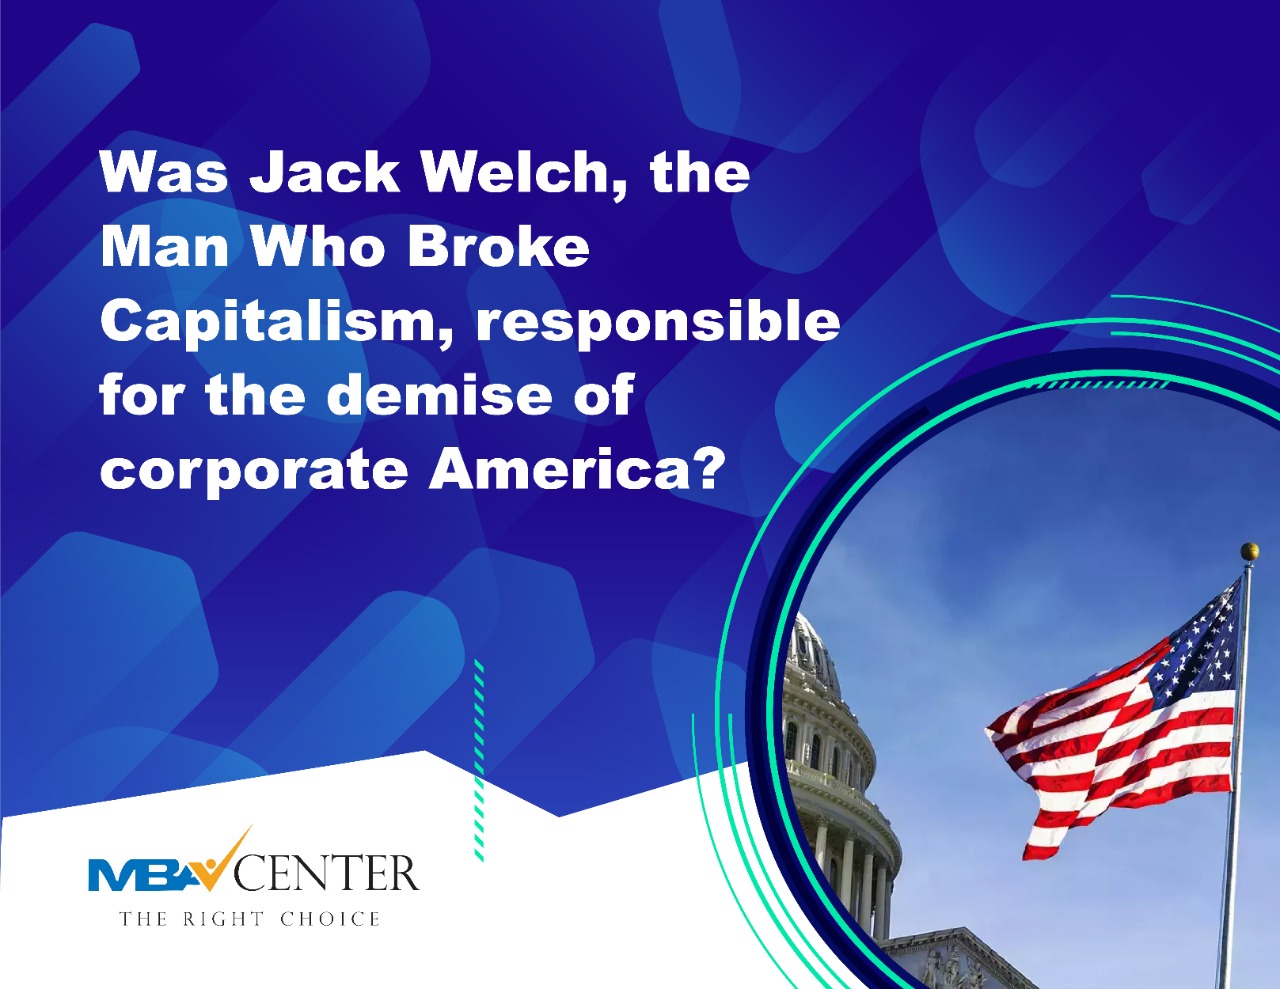 Was Jack Welch, the Man Who Broke Capitalism, responsible for the demise of corporate America?